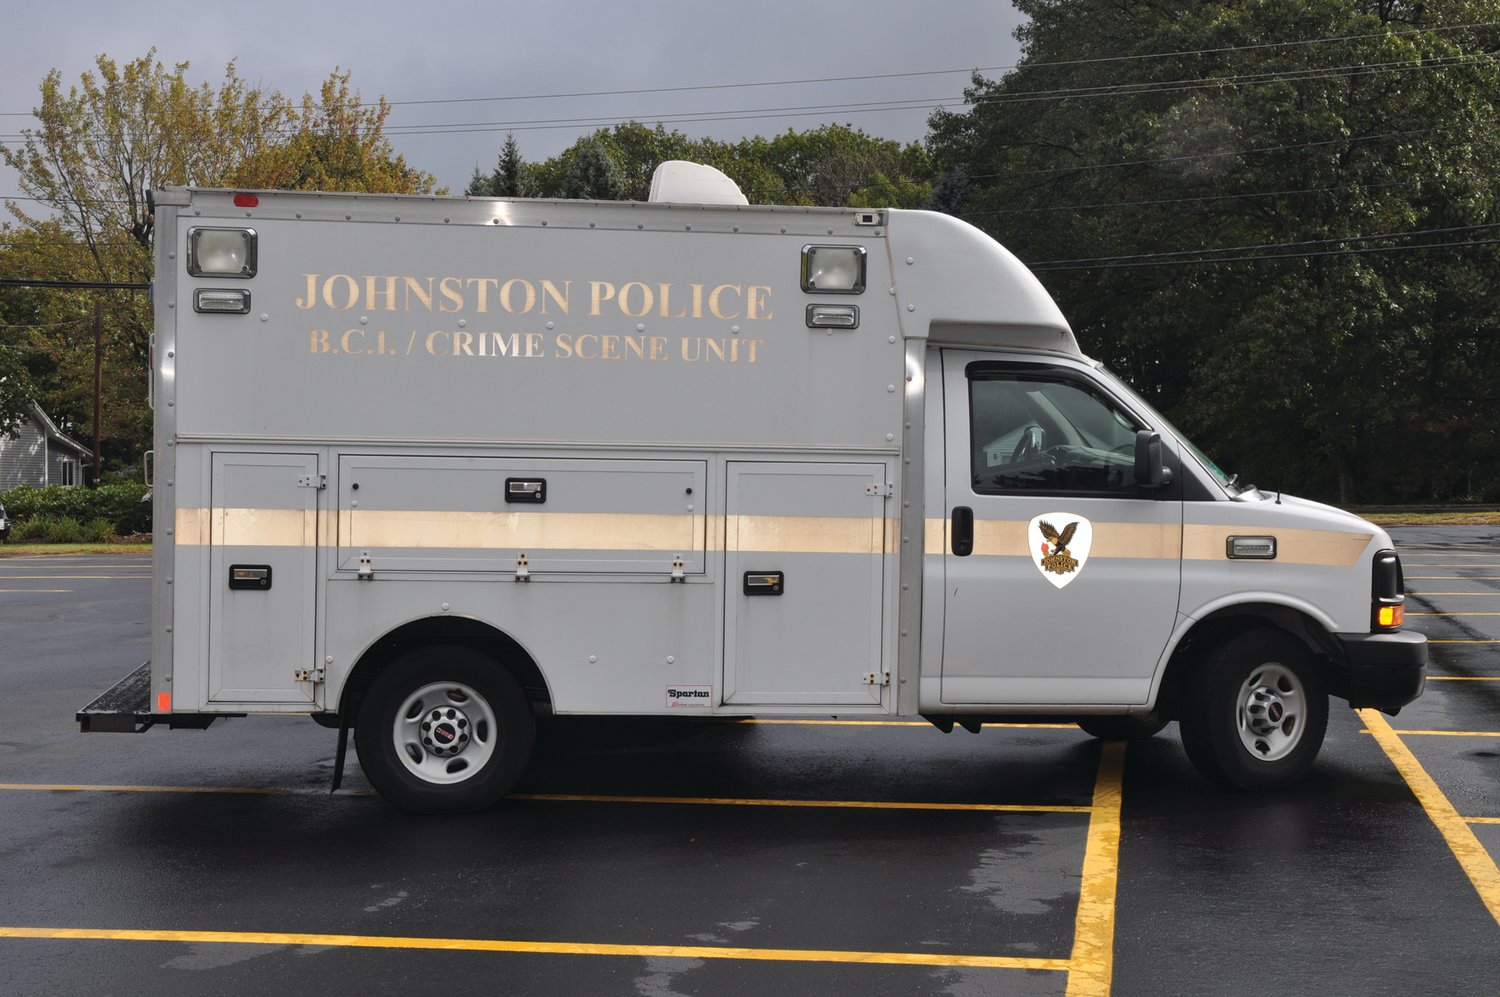 TIRED APPEARANCE: This GMC Savana utility van used by Johnston Police detectives, pictured several years ago, was in desperate need of an exterior restoration.